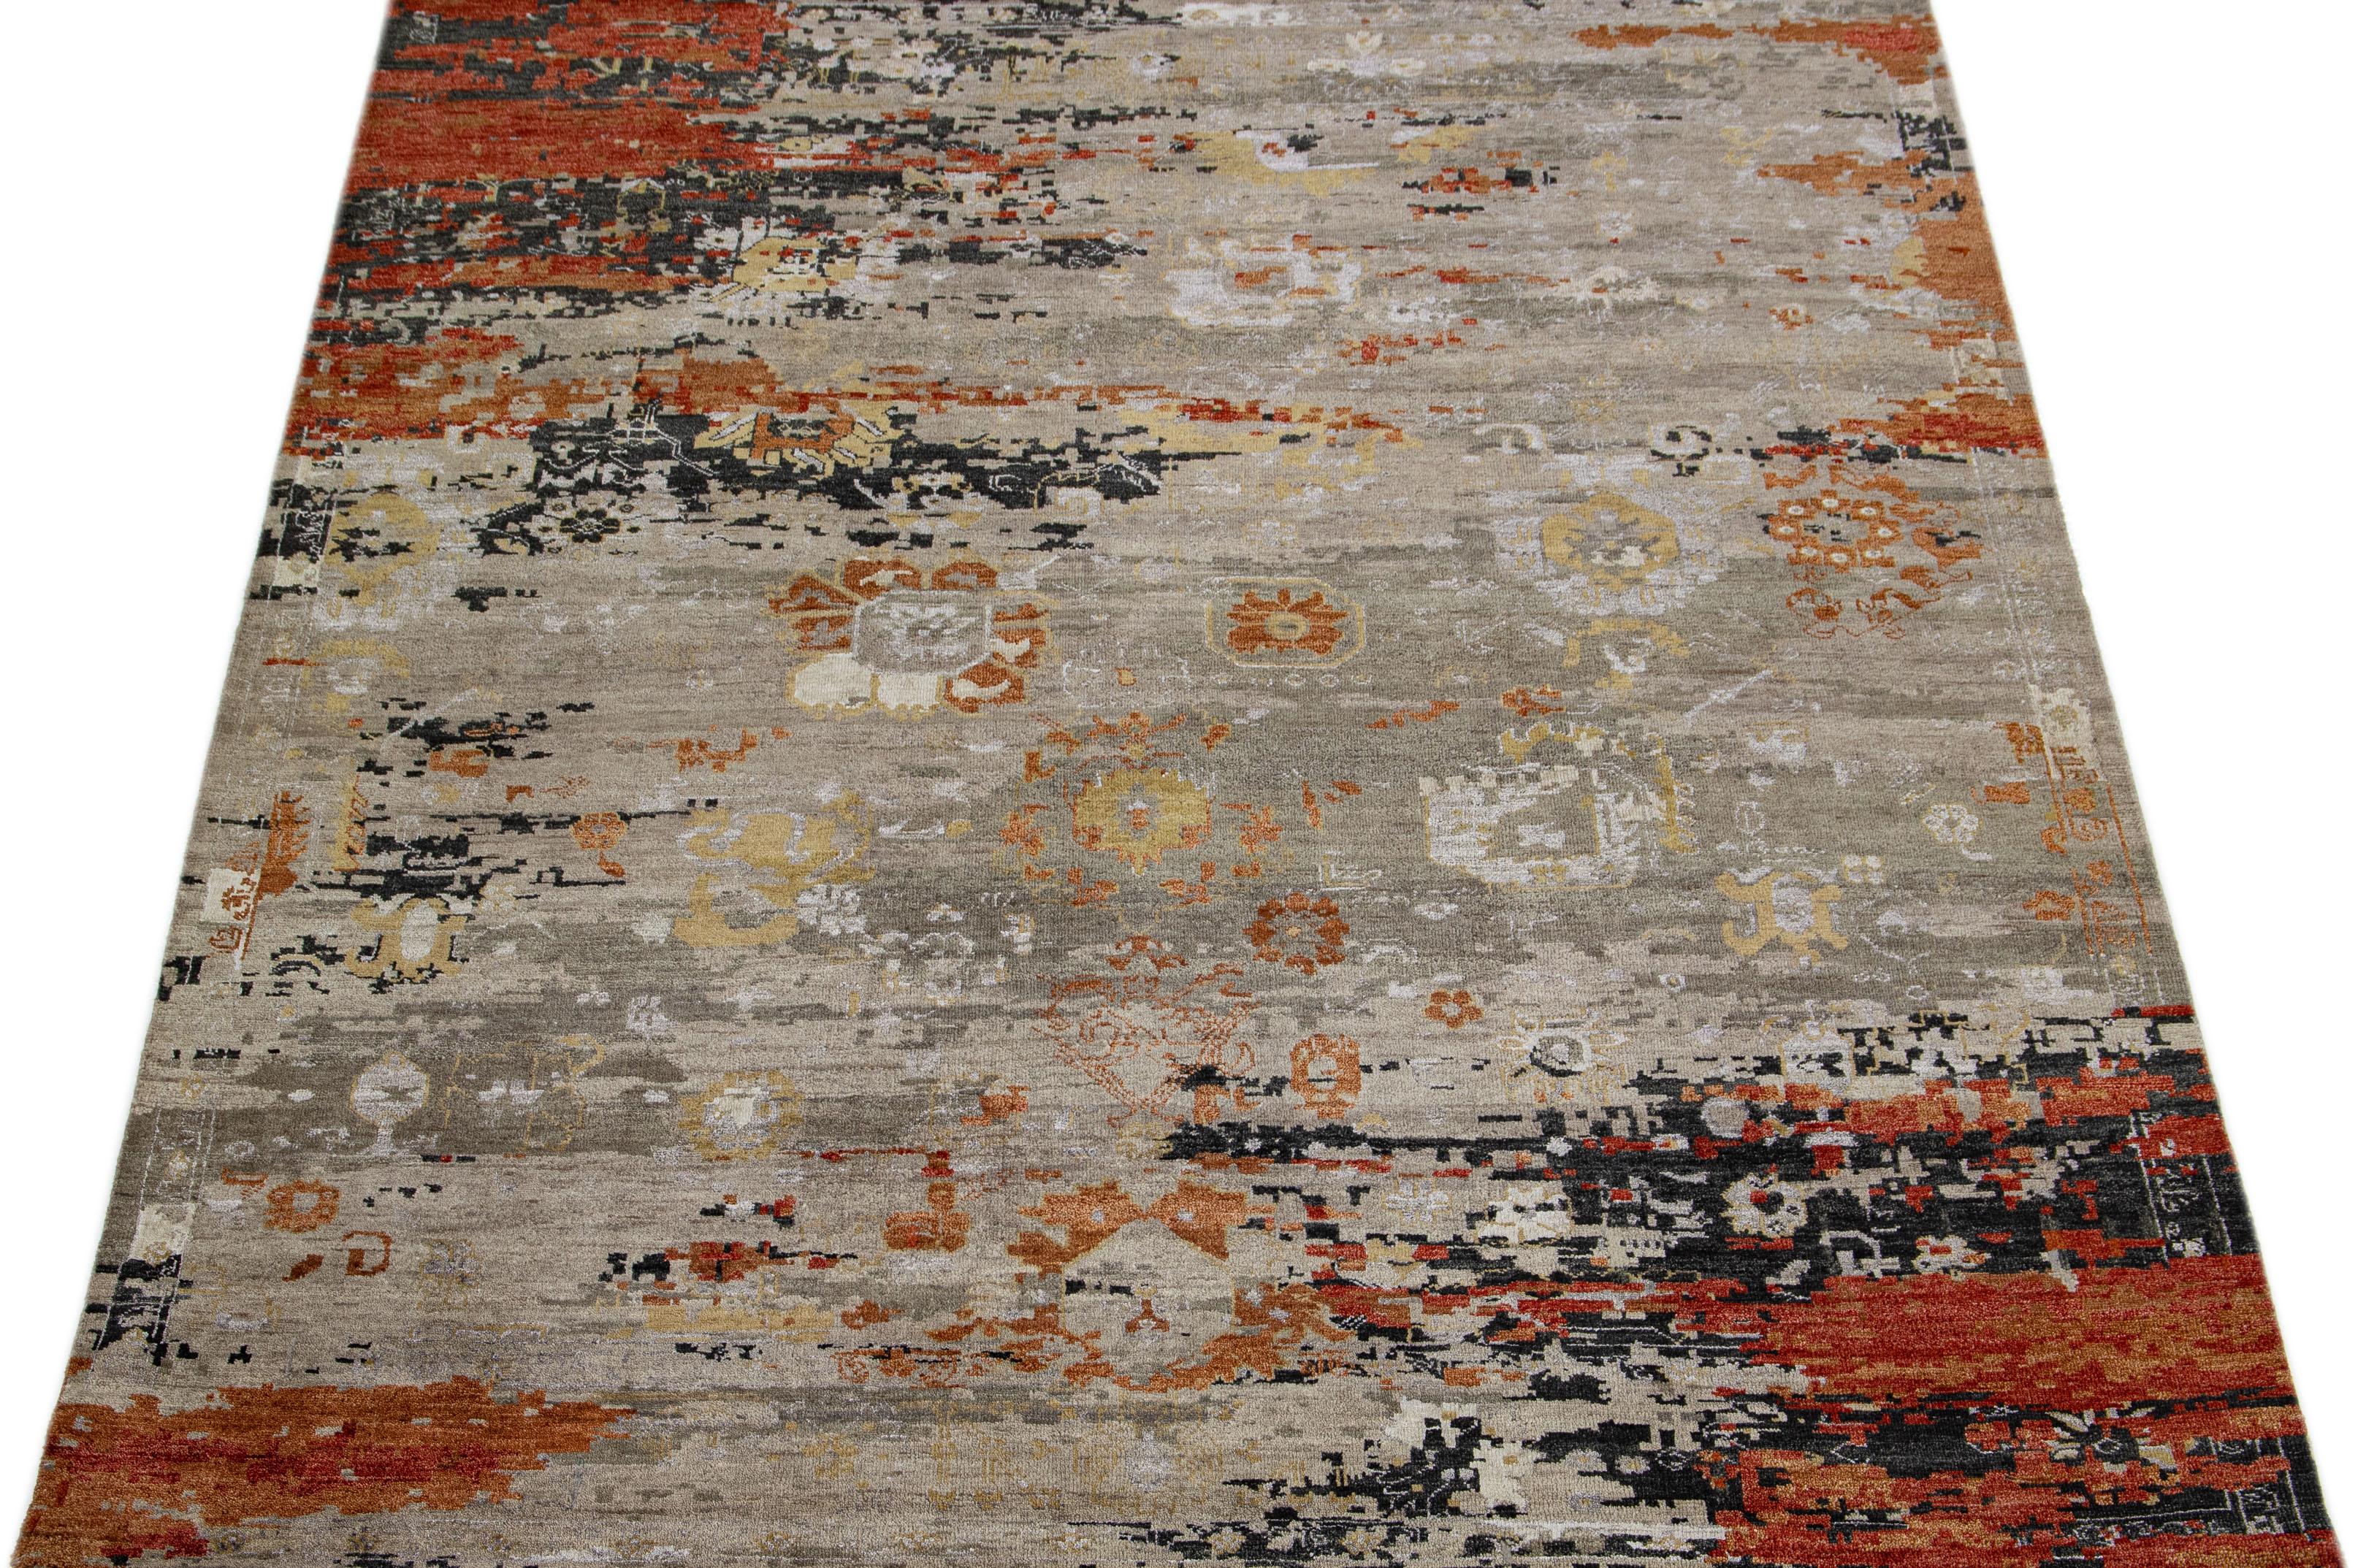 This wool and silk rug boasts a striking contemporary design featuring a beautiful motif in an elegant grey hue. The exquisite orange accents perfectly complement the distinct abstract pattern, lending an alluring touch of glamour that sets it